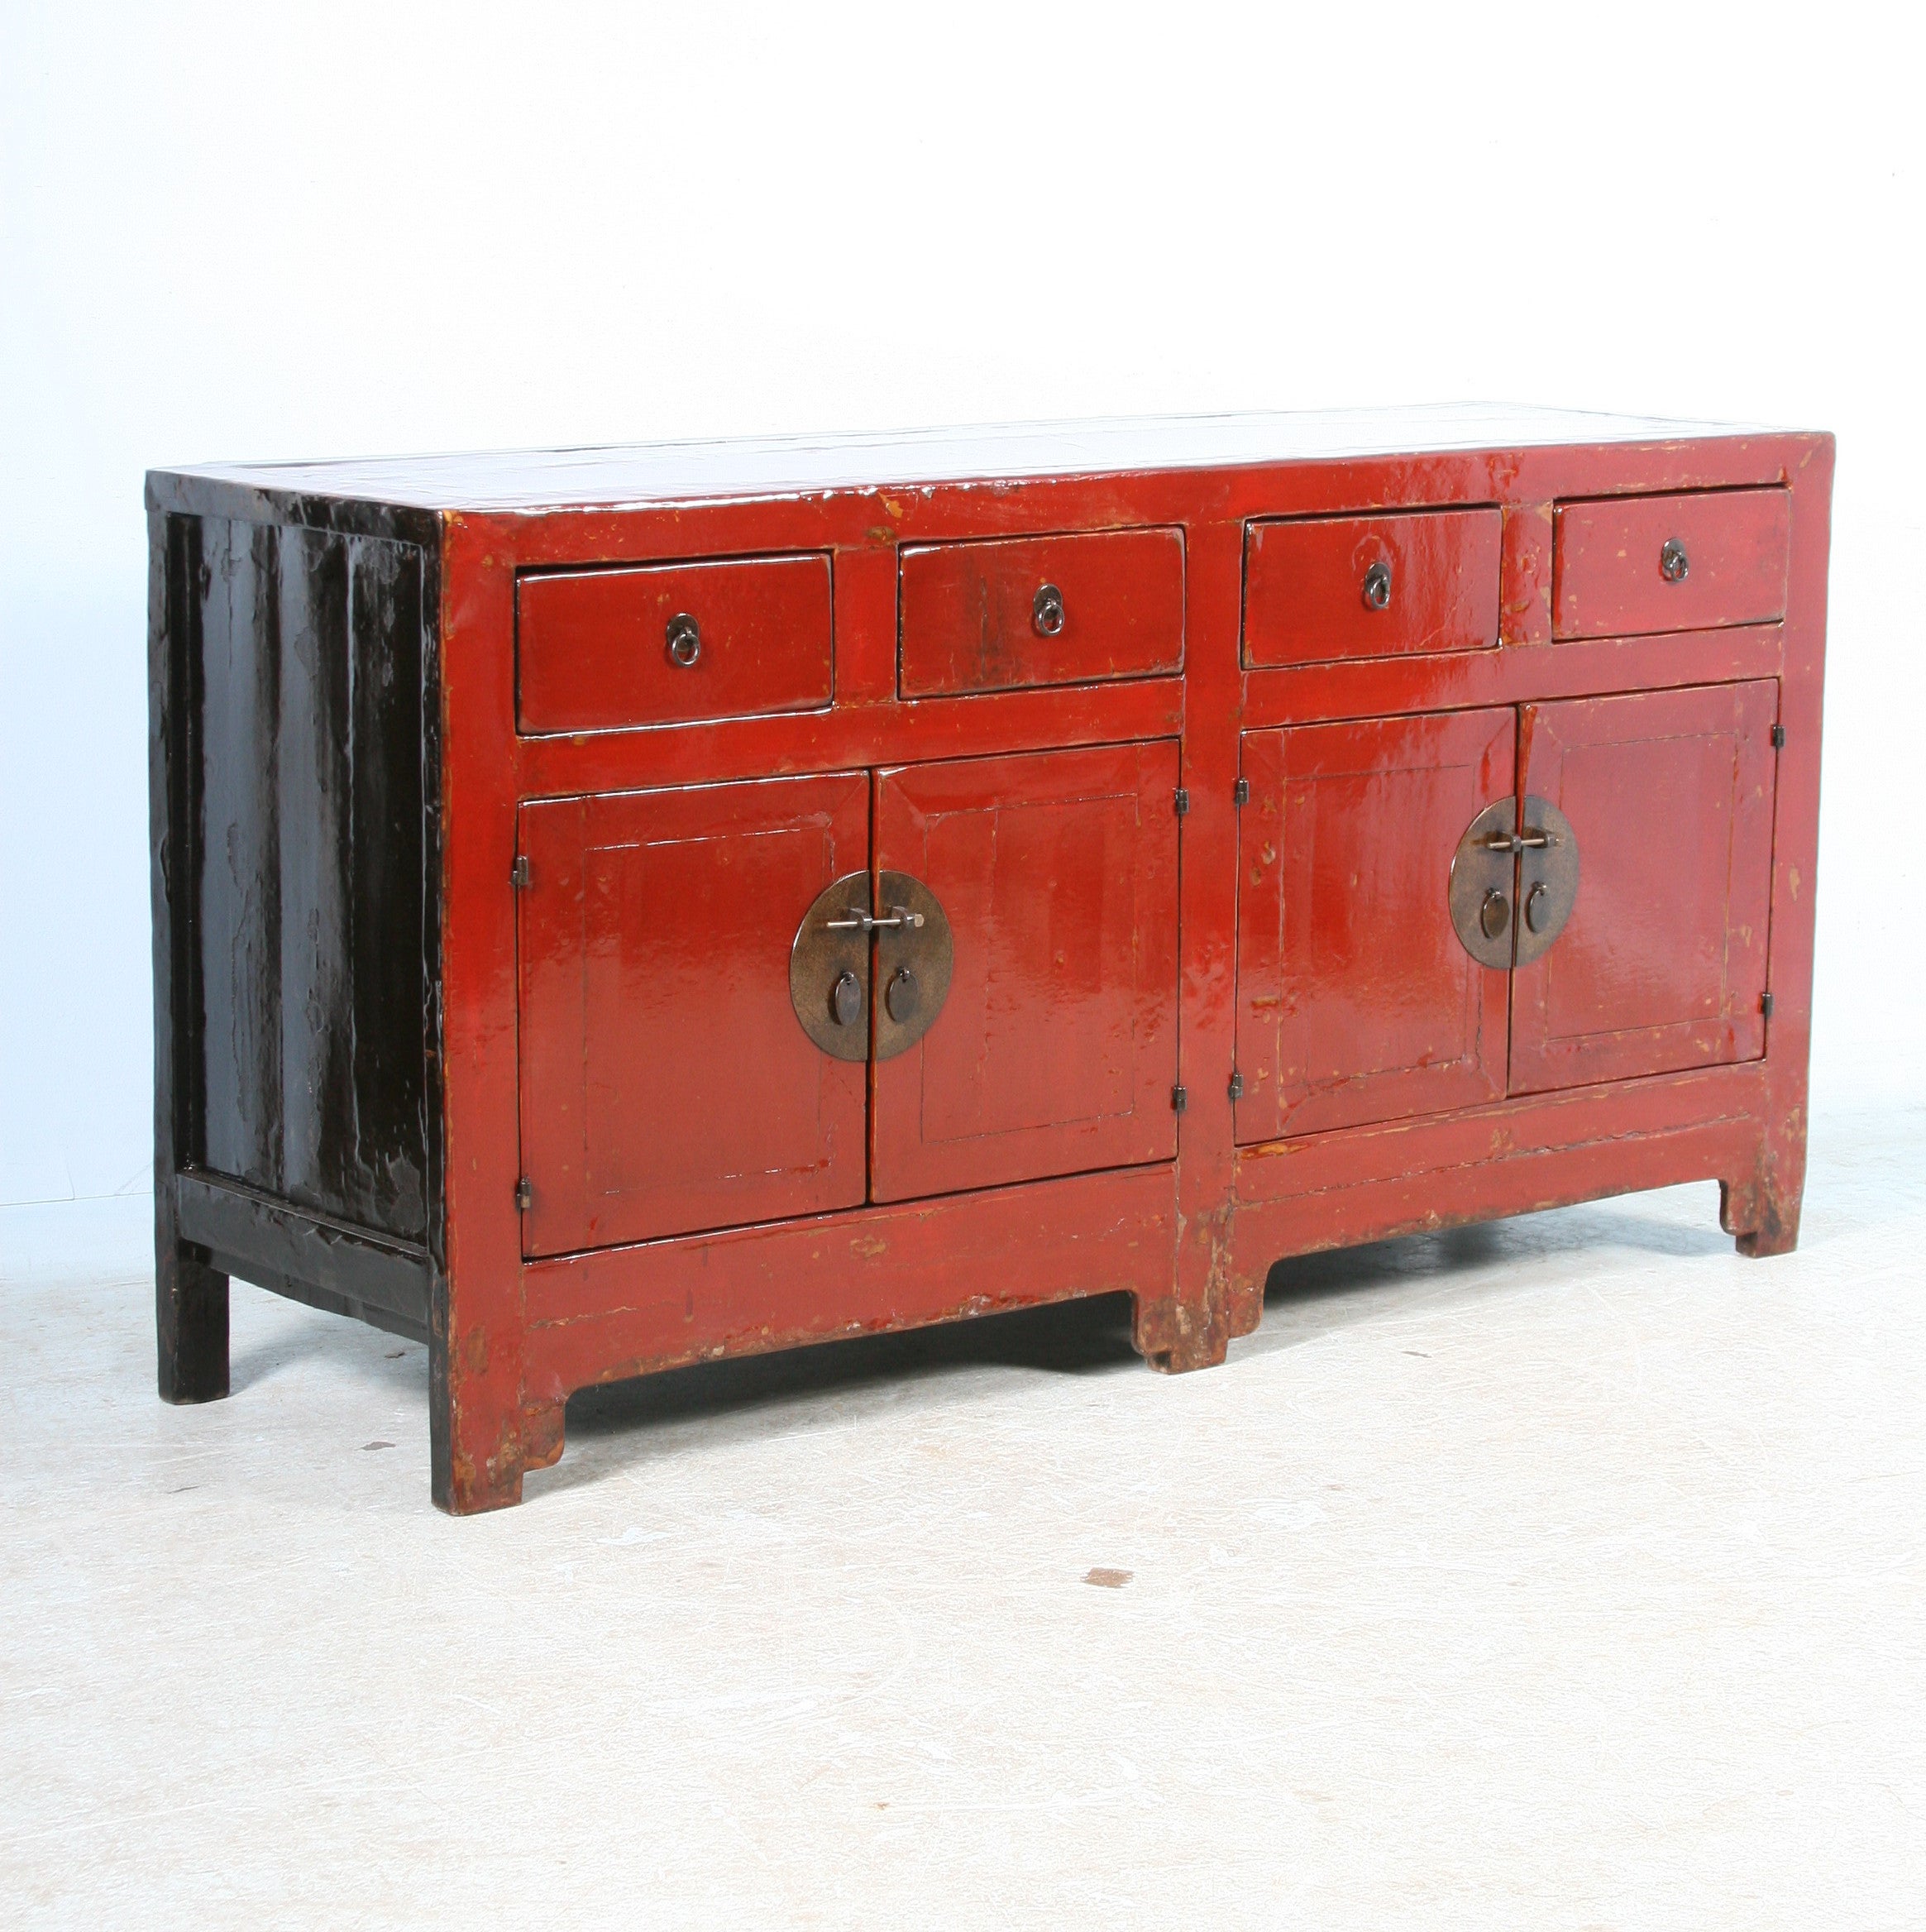 Antique Red Lacquered Chinese Sideboard/Console